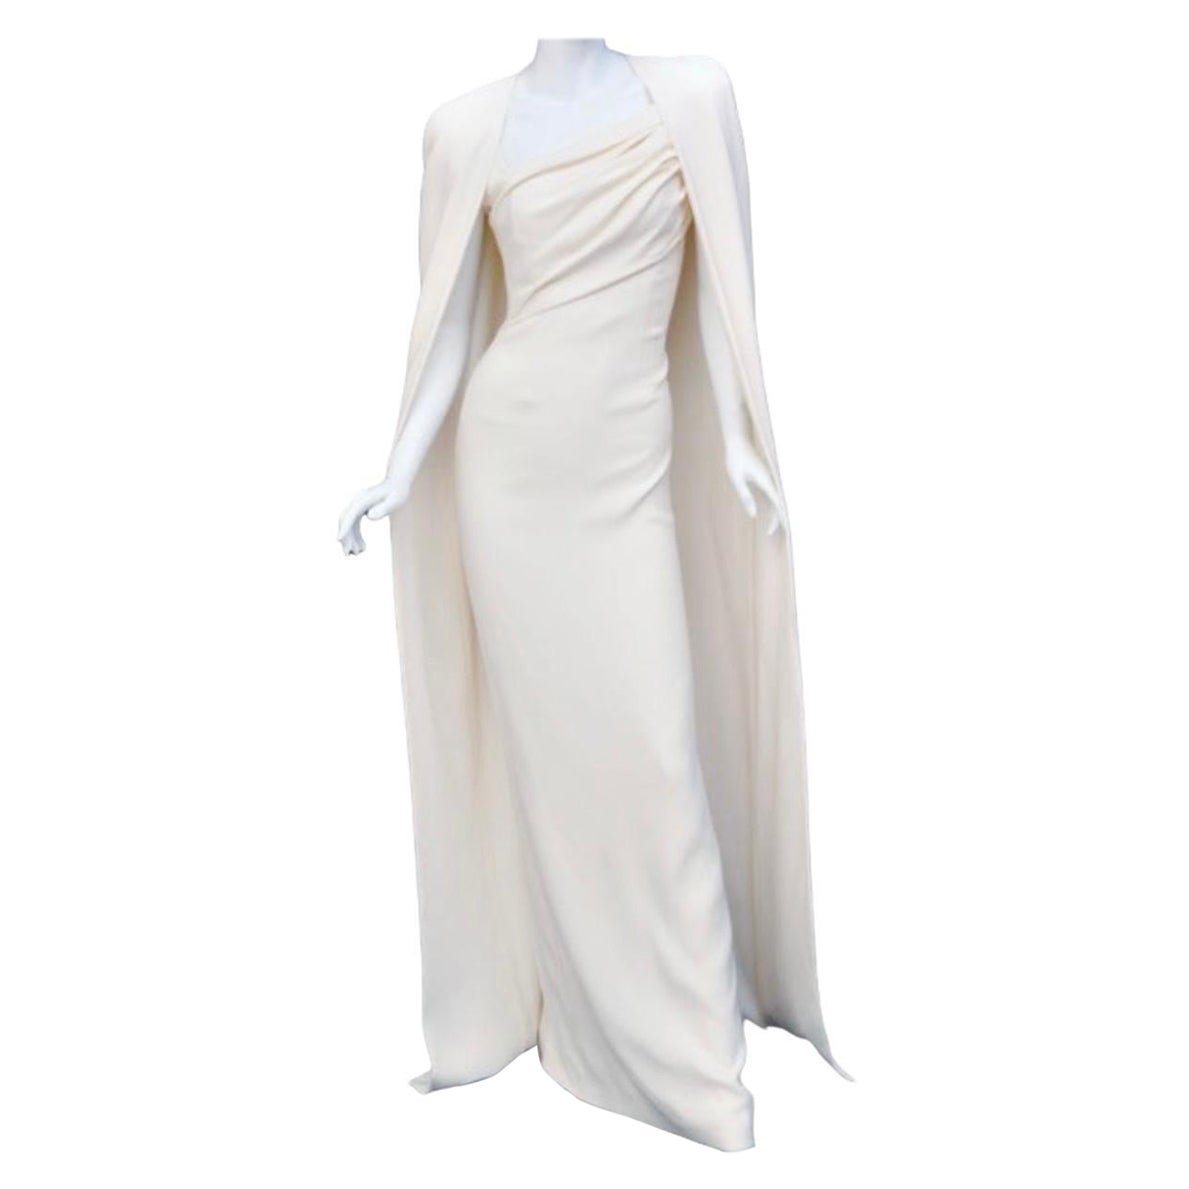 ICONIC TOM FORD CHALK WHITE DOUBLE GEORGETTE STRETCH EVENING CAPE DRESS Sz. 38